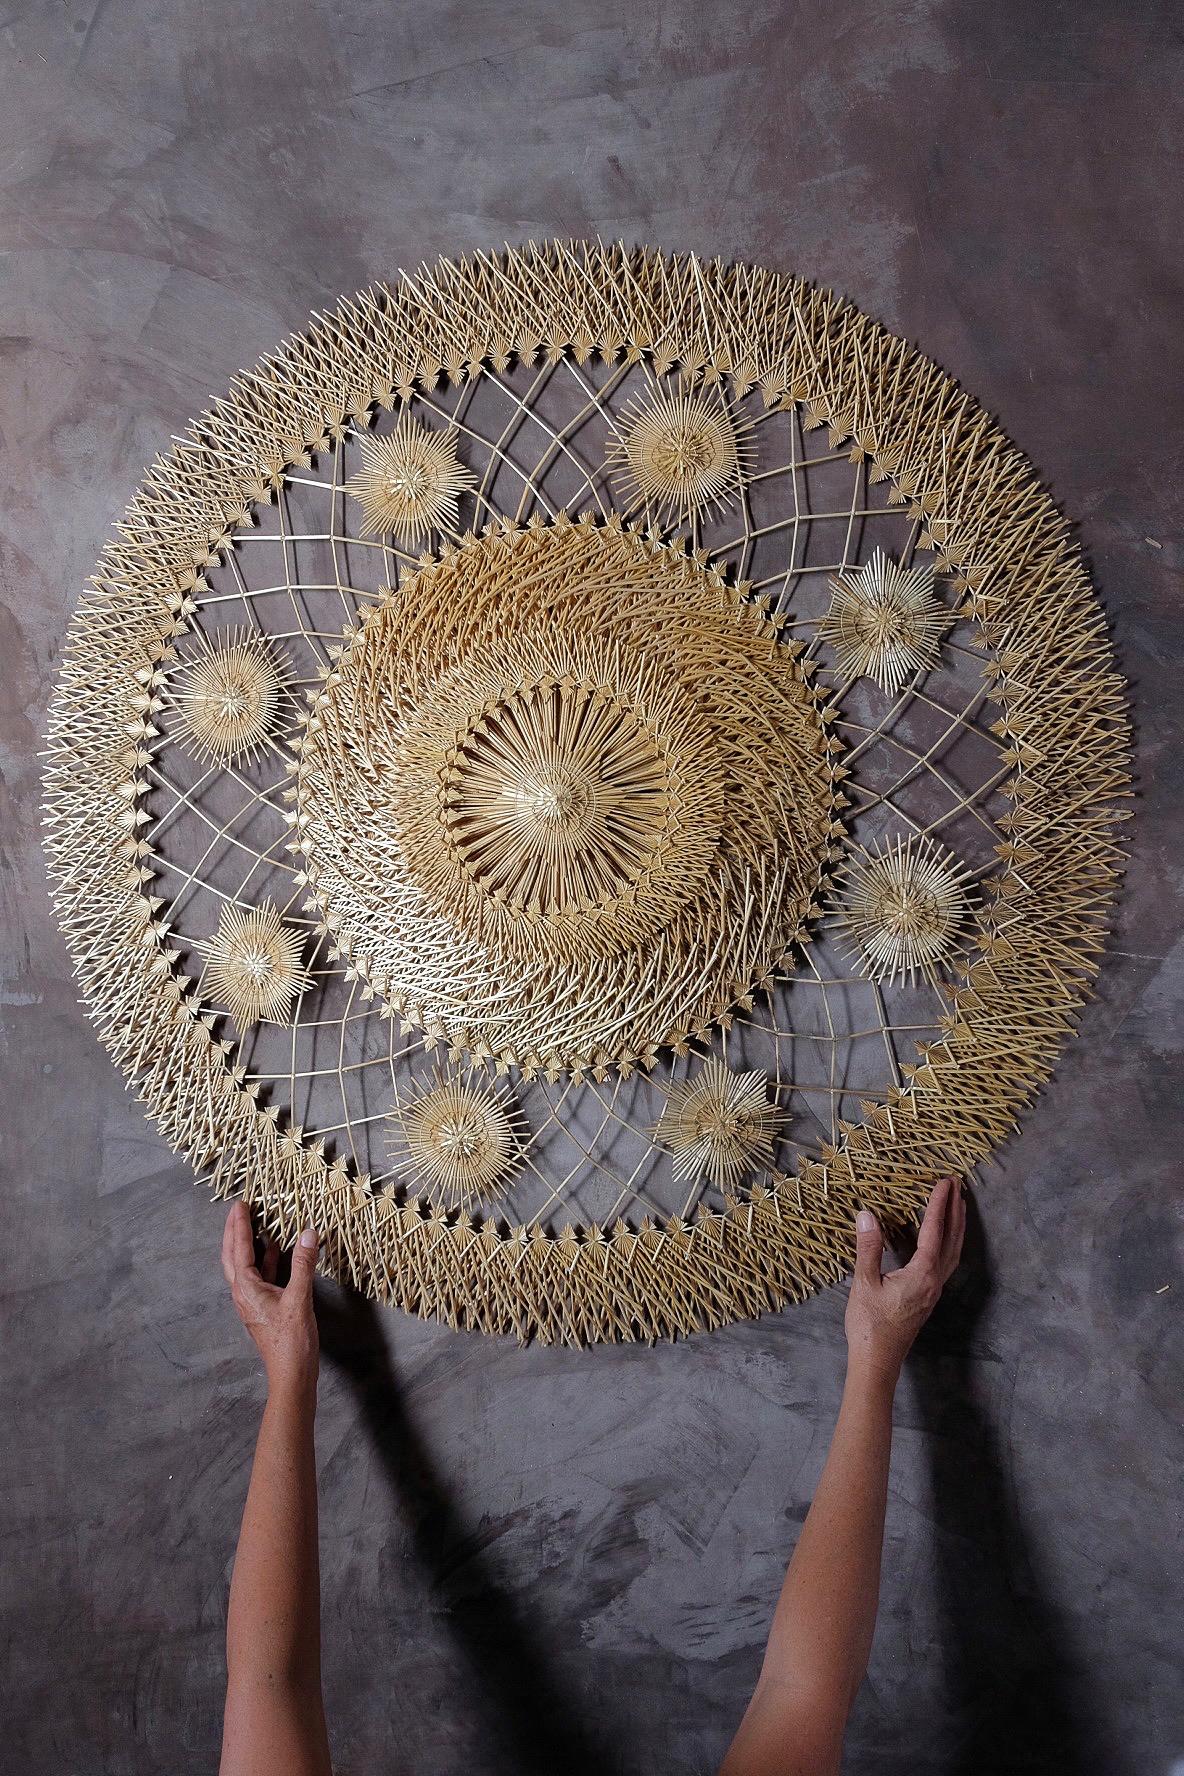 Cornelio star by Onora
Dimensions: D 120 cm
Materials: Woven wheat fiber

Hand woven by the Tata Curiata workshop, master artisans who received a special mention in the Loewe Craft Prize of 2017 edition. Several hundred strands of wheat fibre